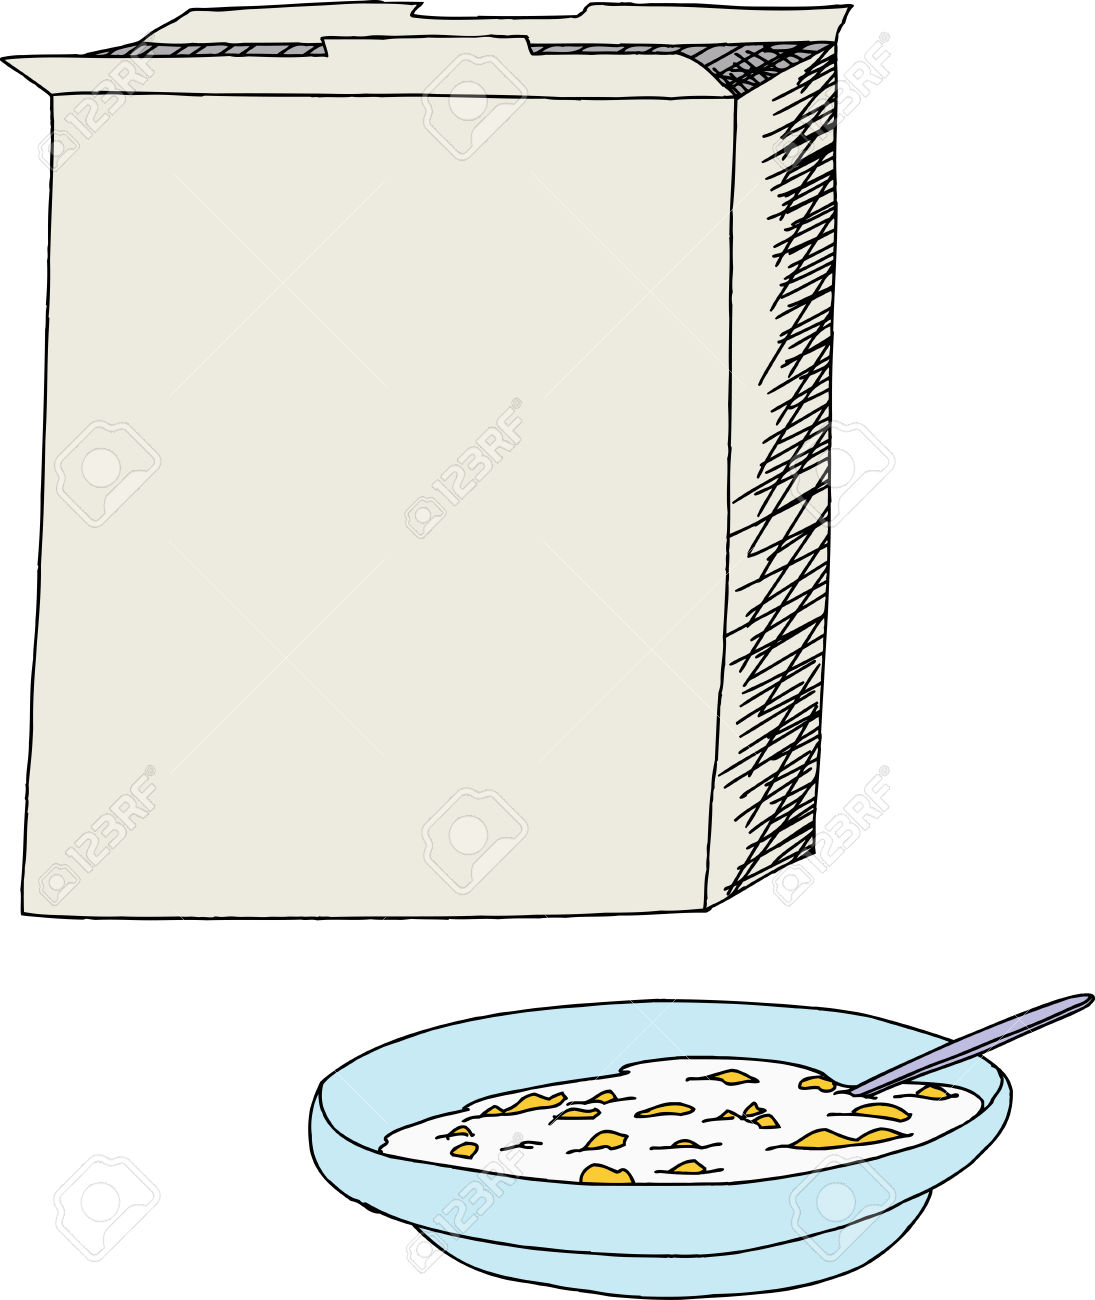 cereal box: Open cereal box with bowl of corn flakes over white Illustration